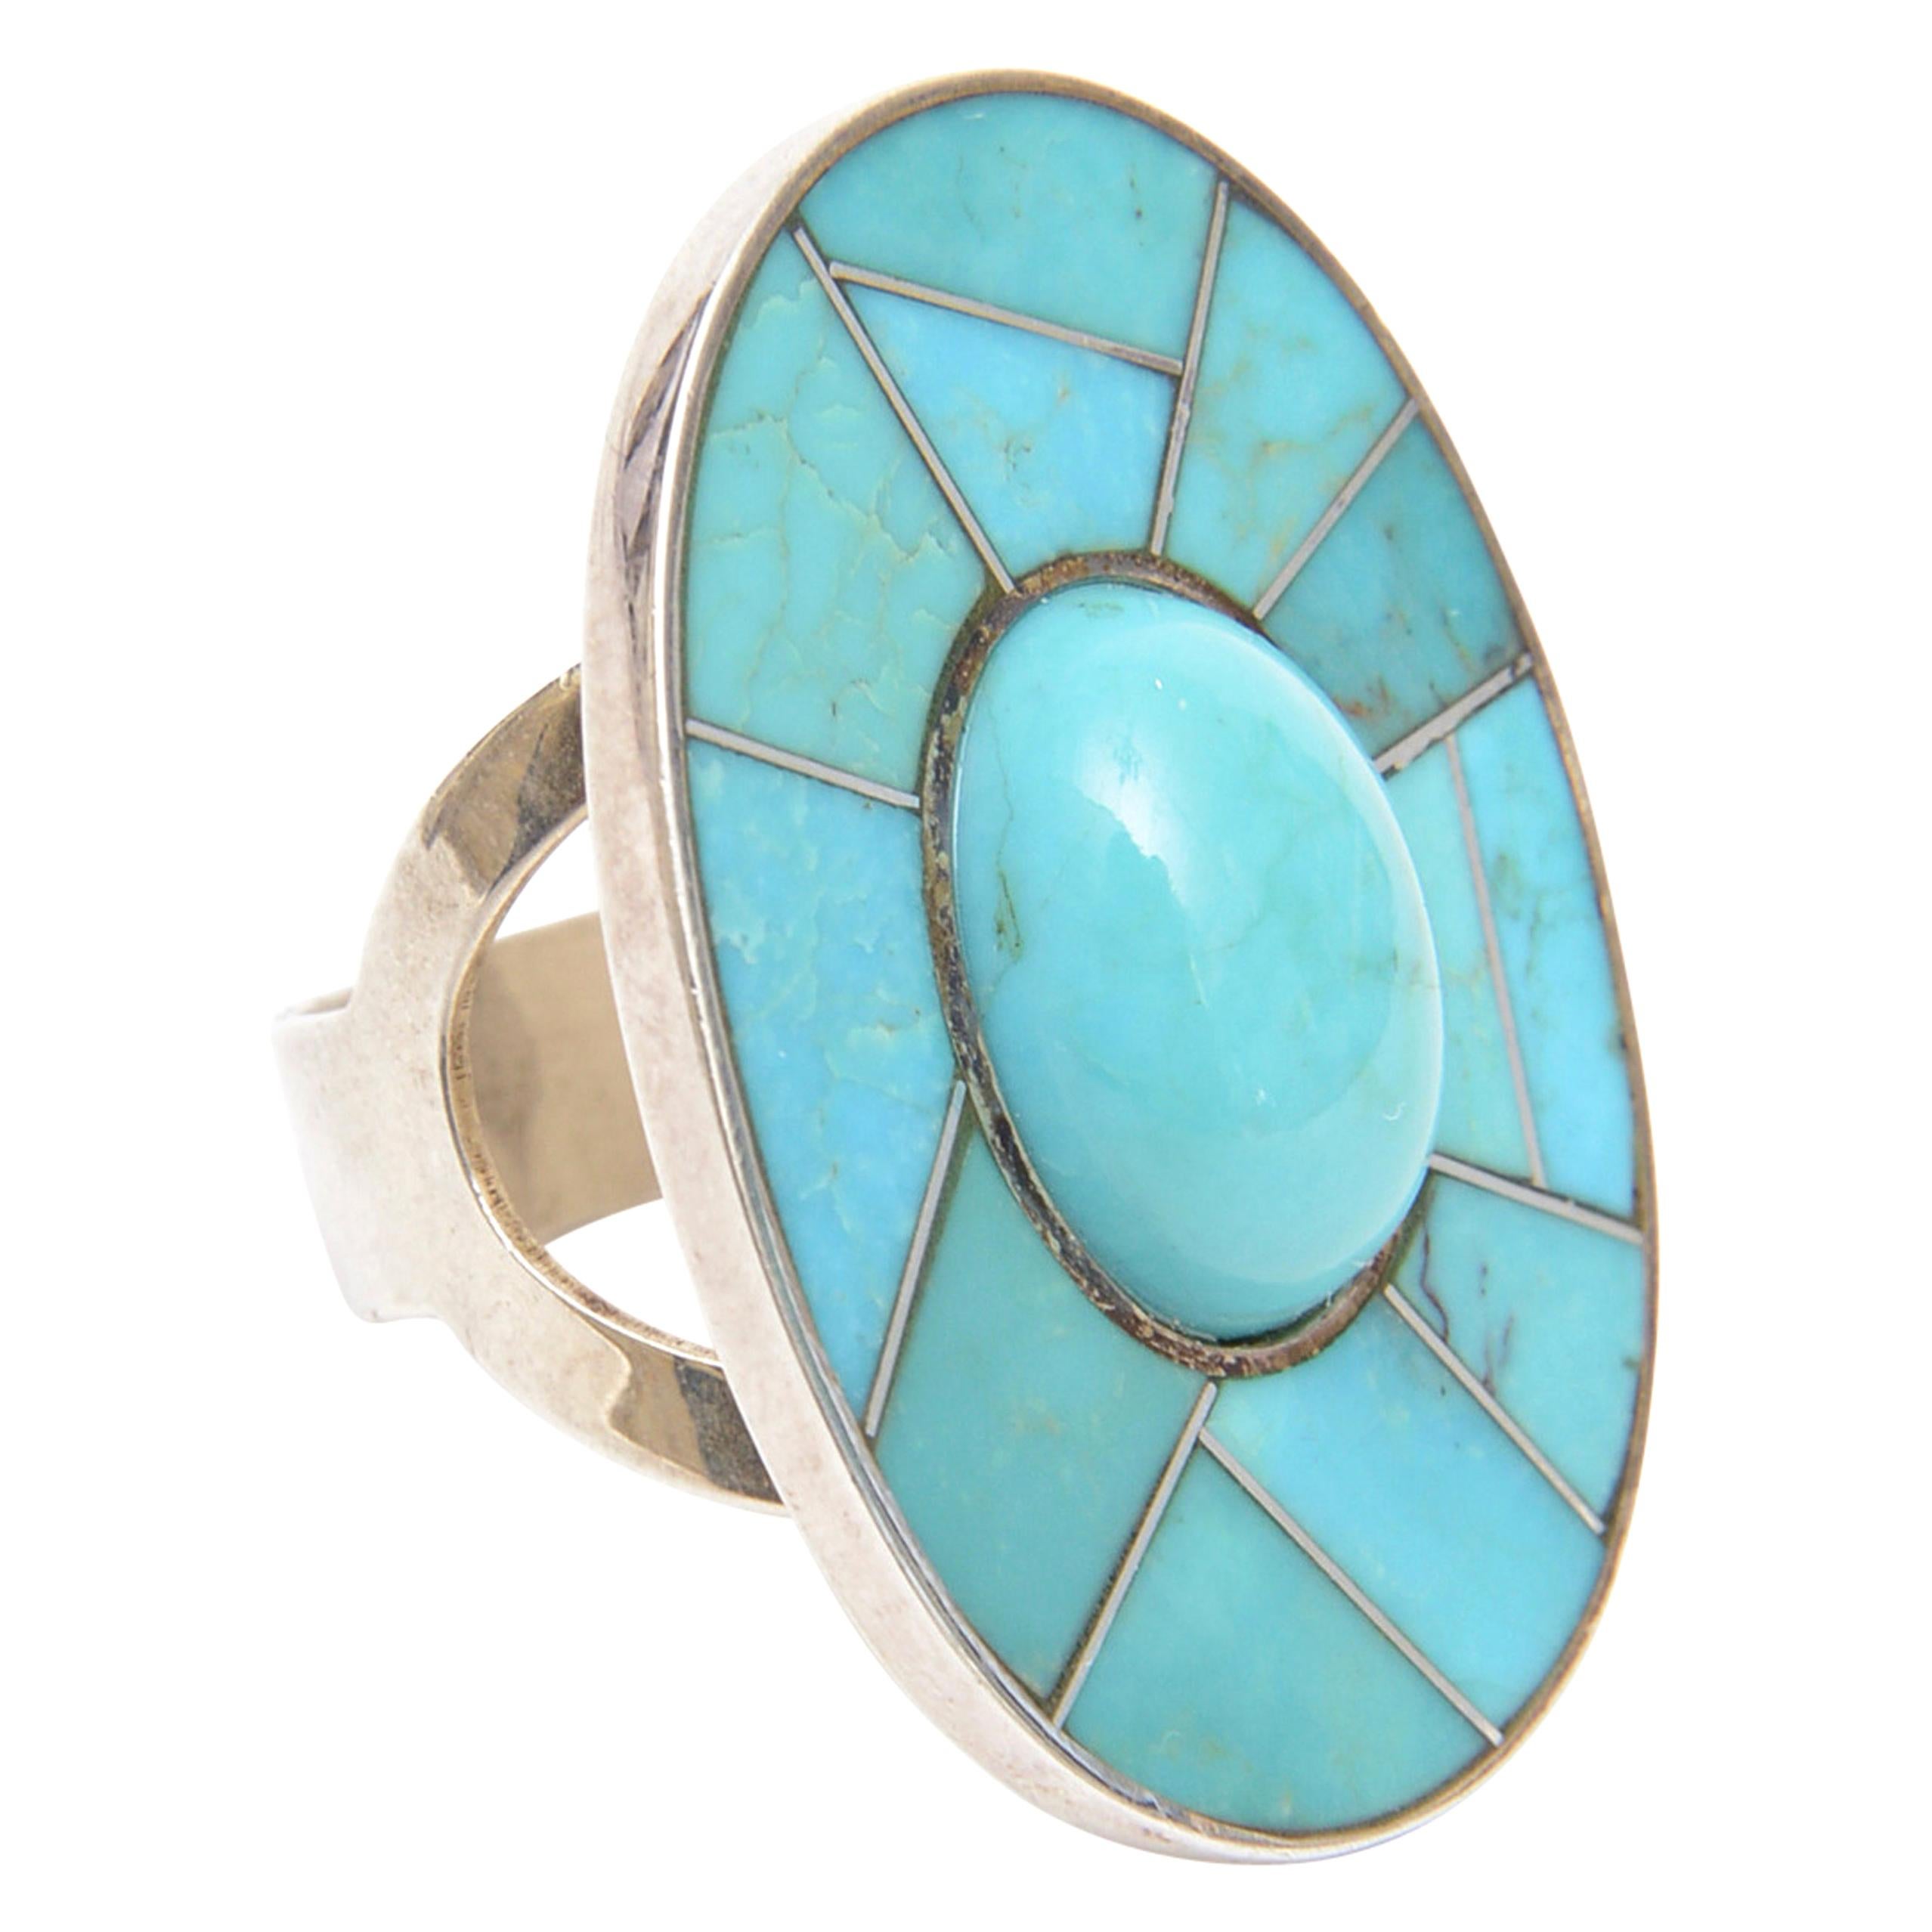  Sterling Silver and Turquoise Sculptural Ring